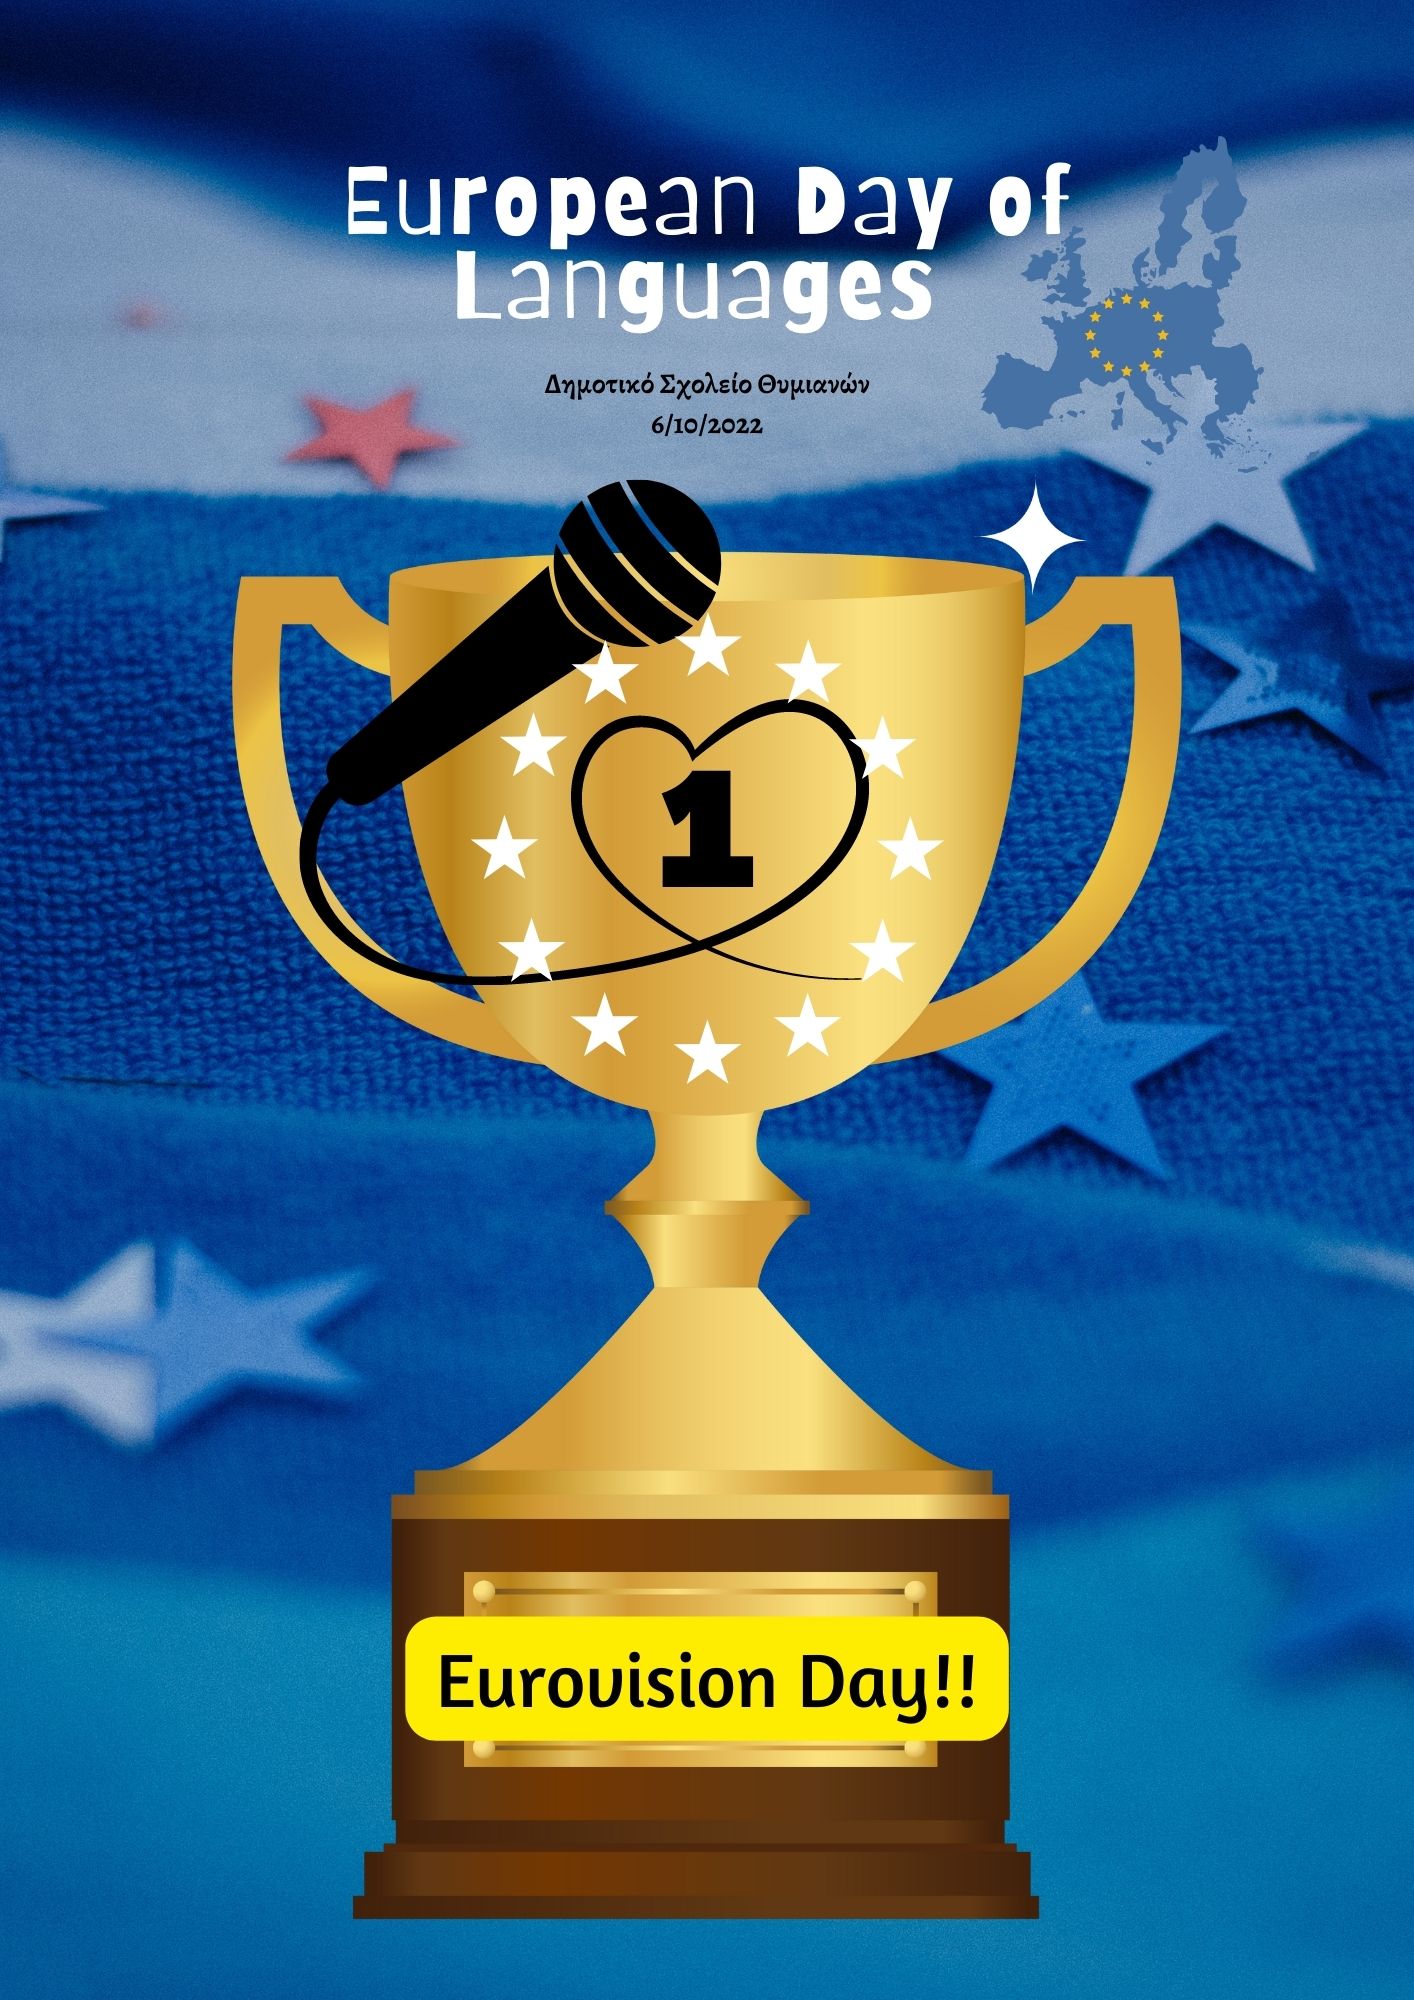 Eurovision Day of Languages